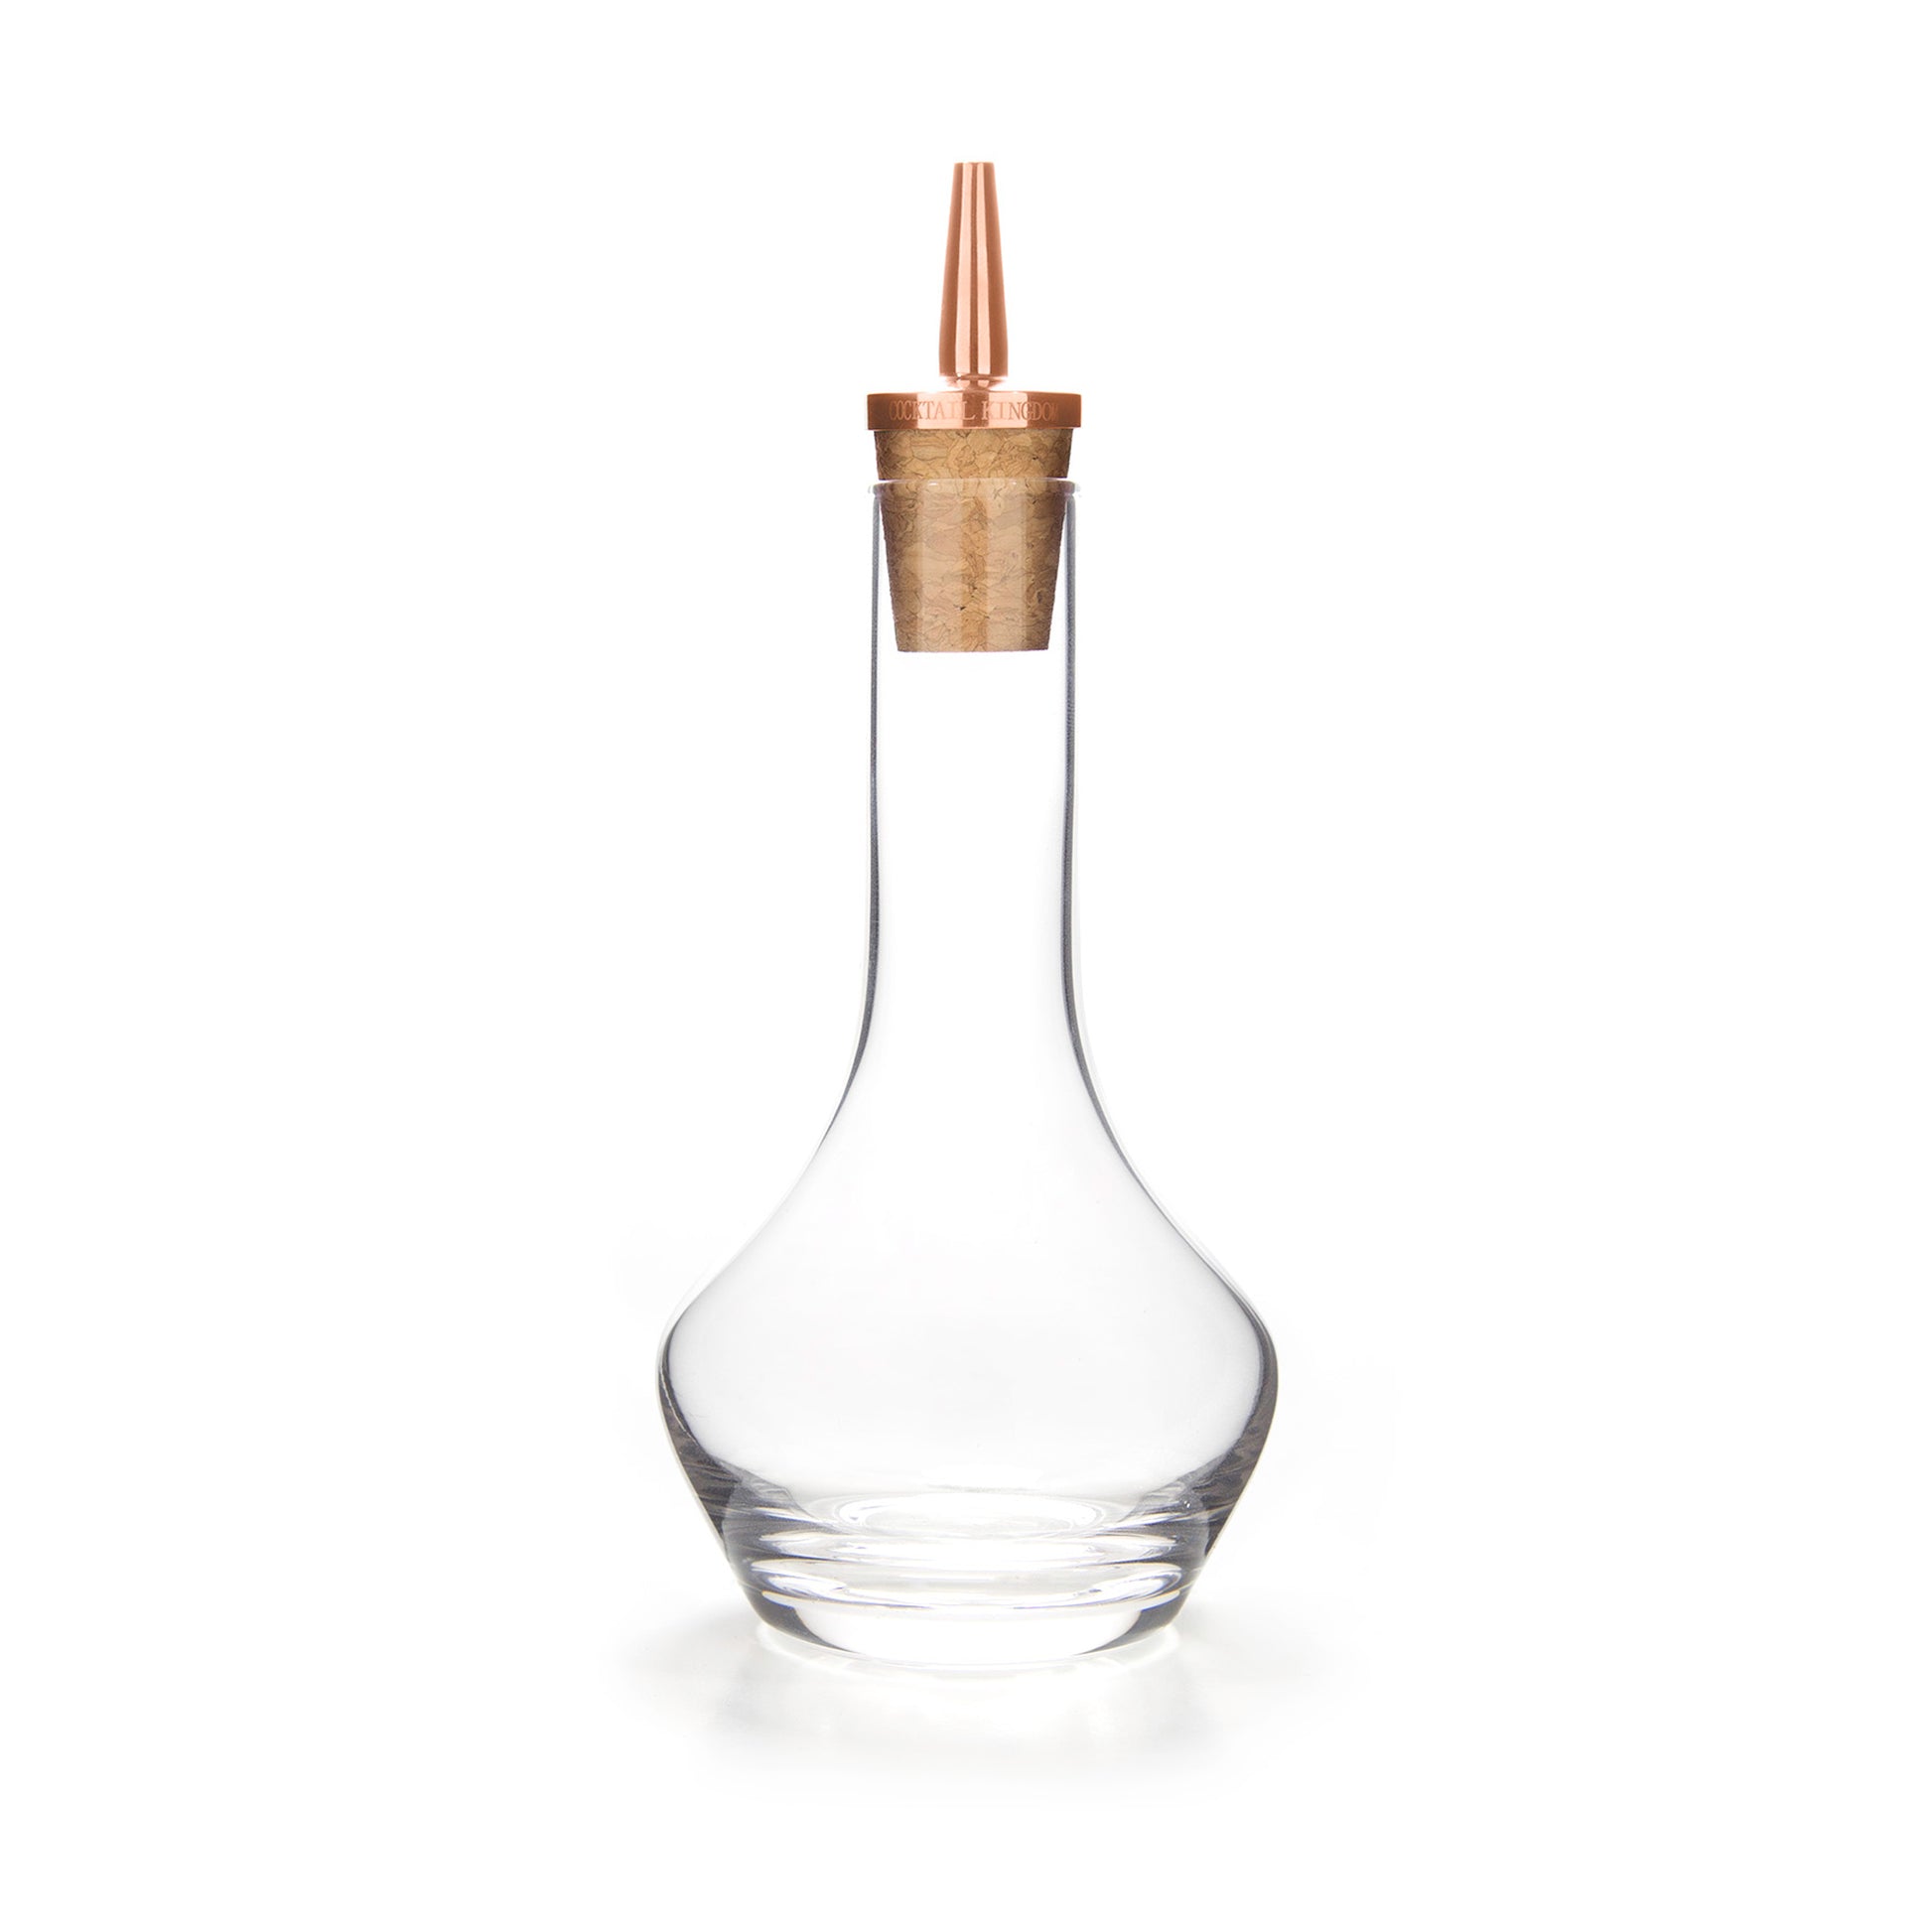 BITTERS BOTTLE – COPPER-PLATED DASHER TOP / 100ml (3.4oz)